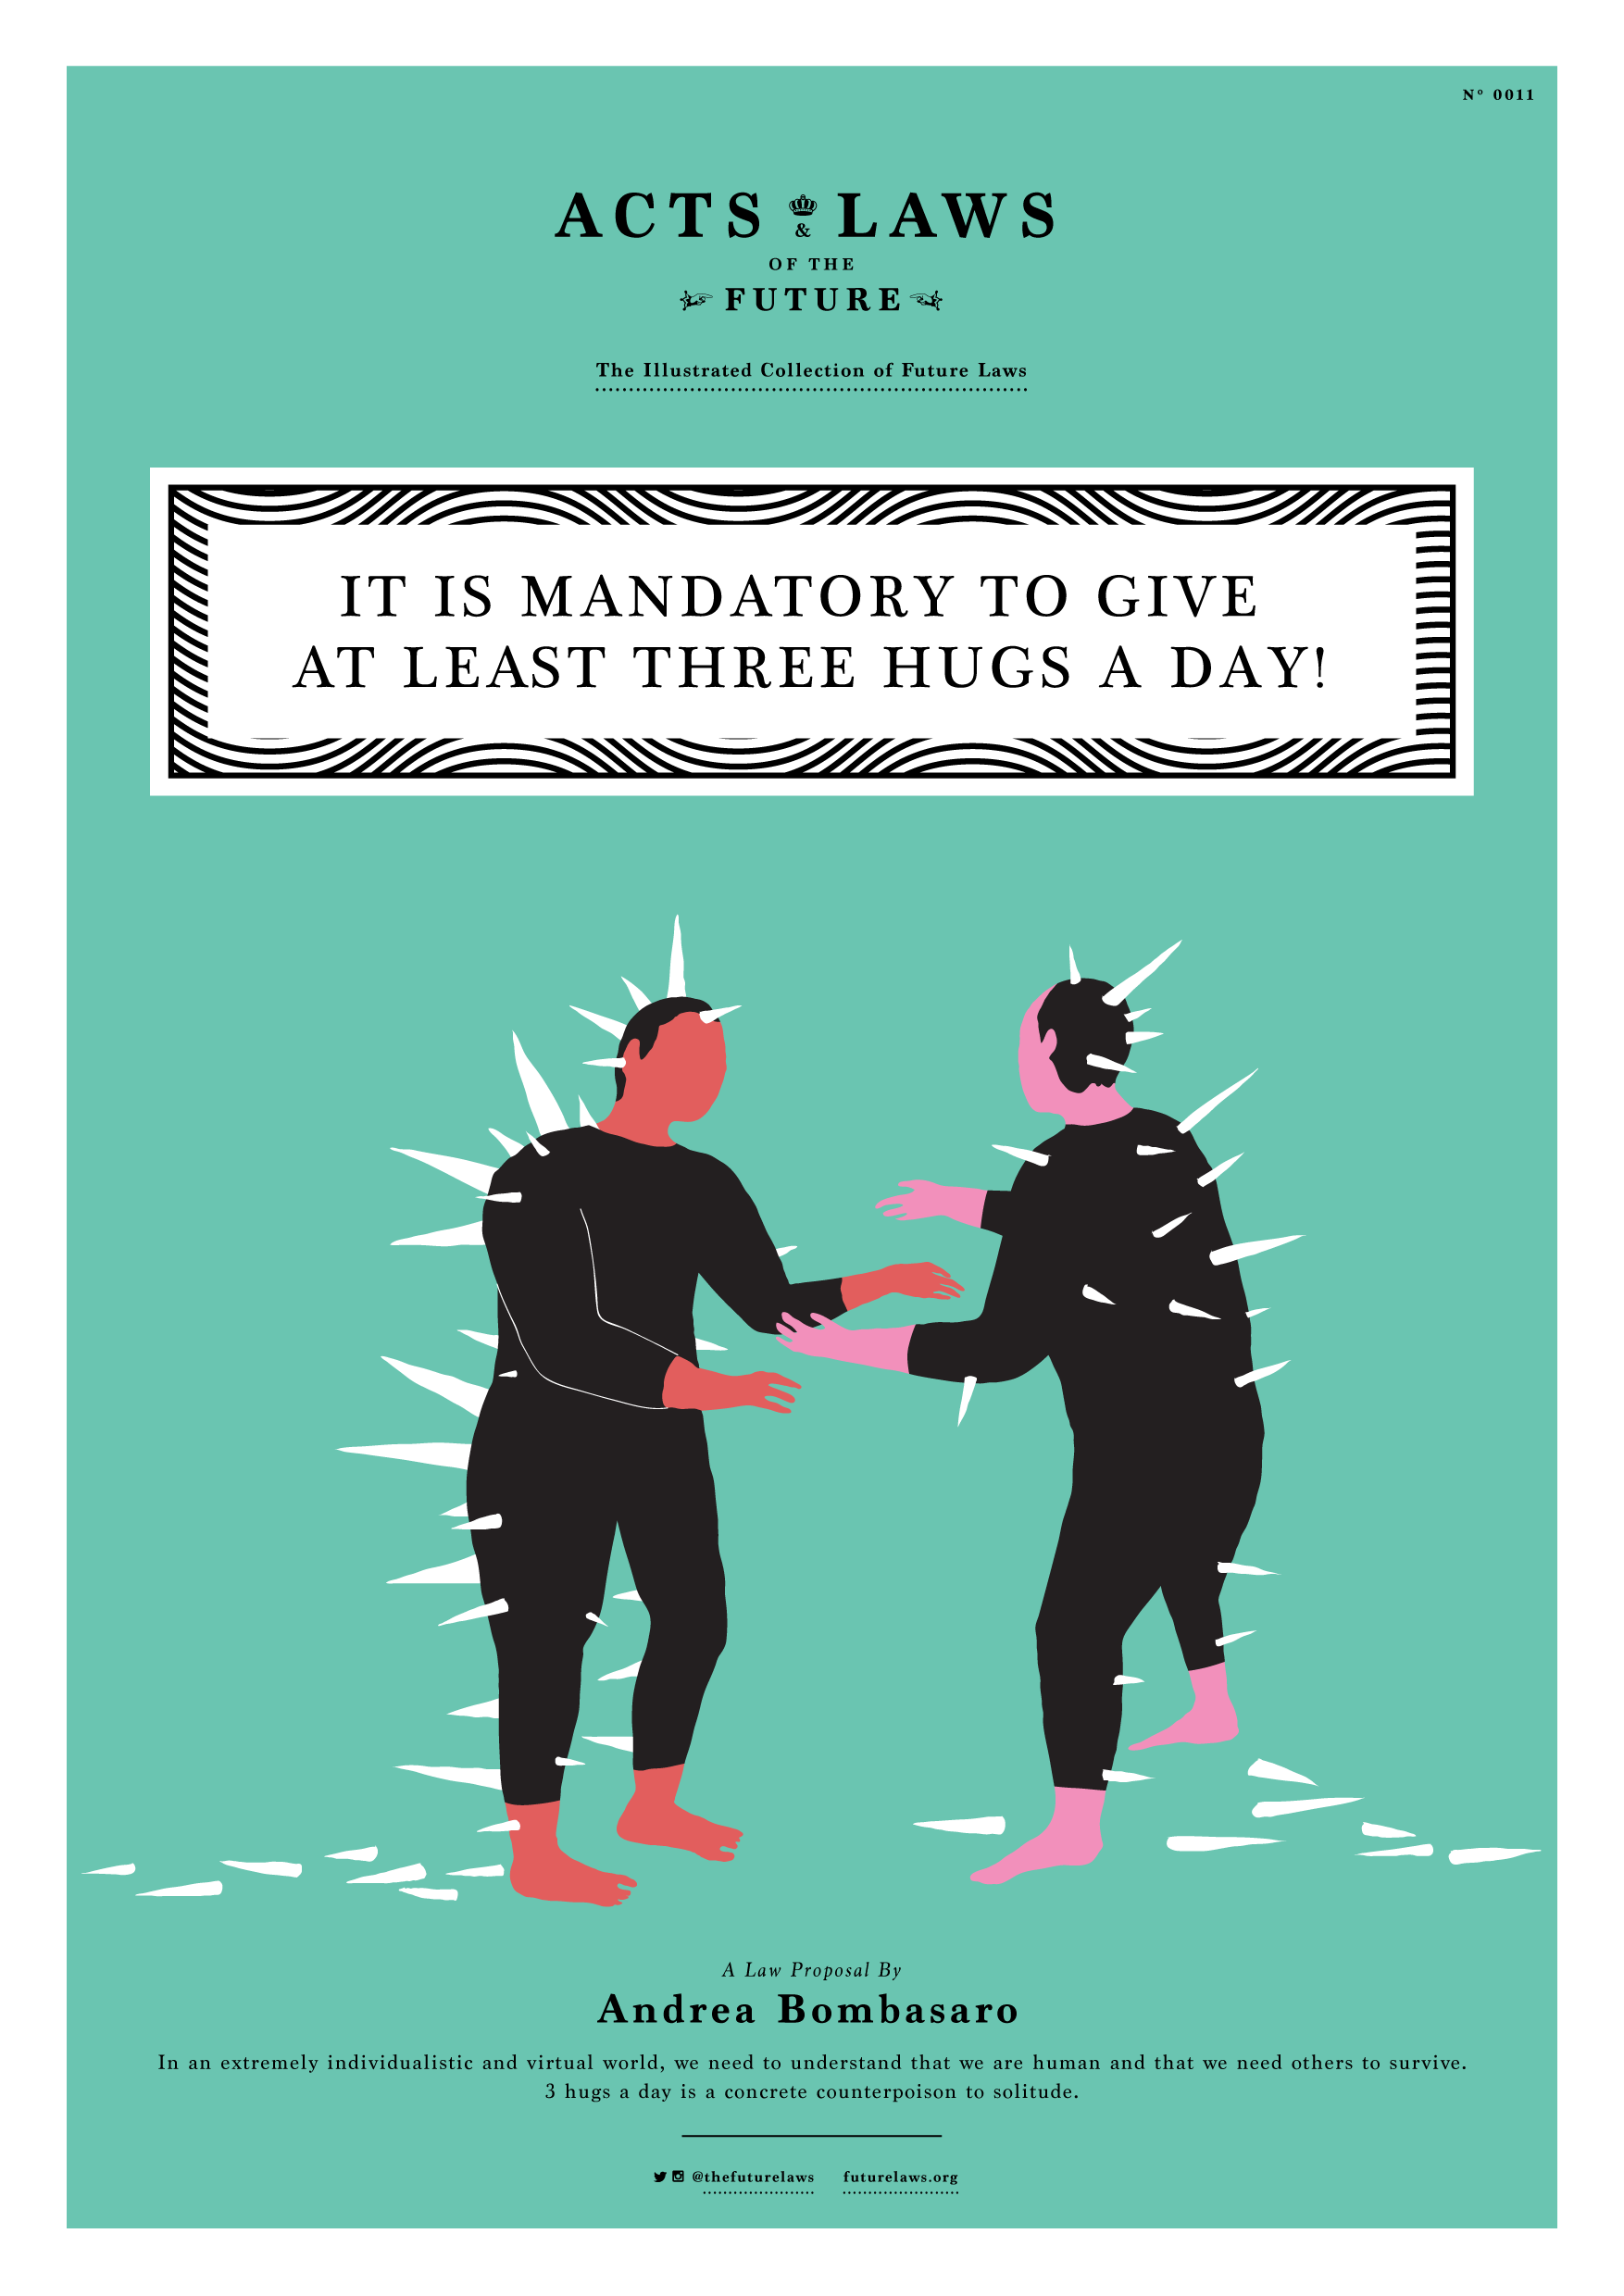 It is mandatory to give at least three hugs a day!